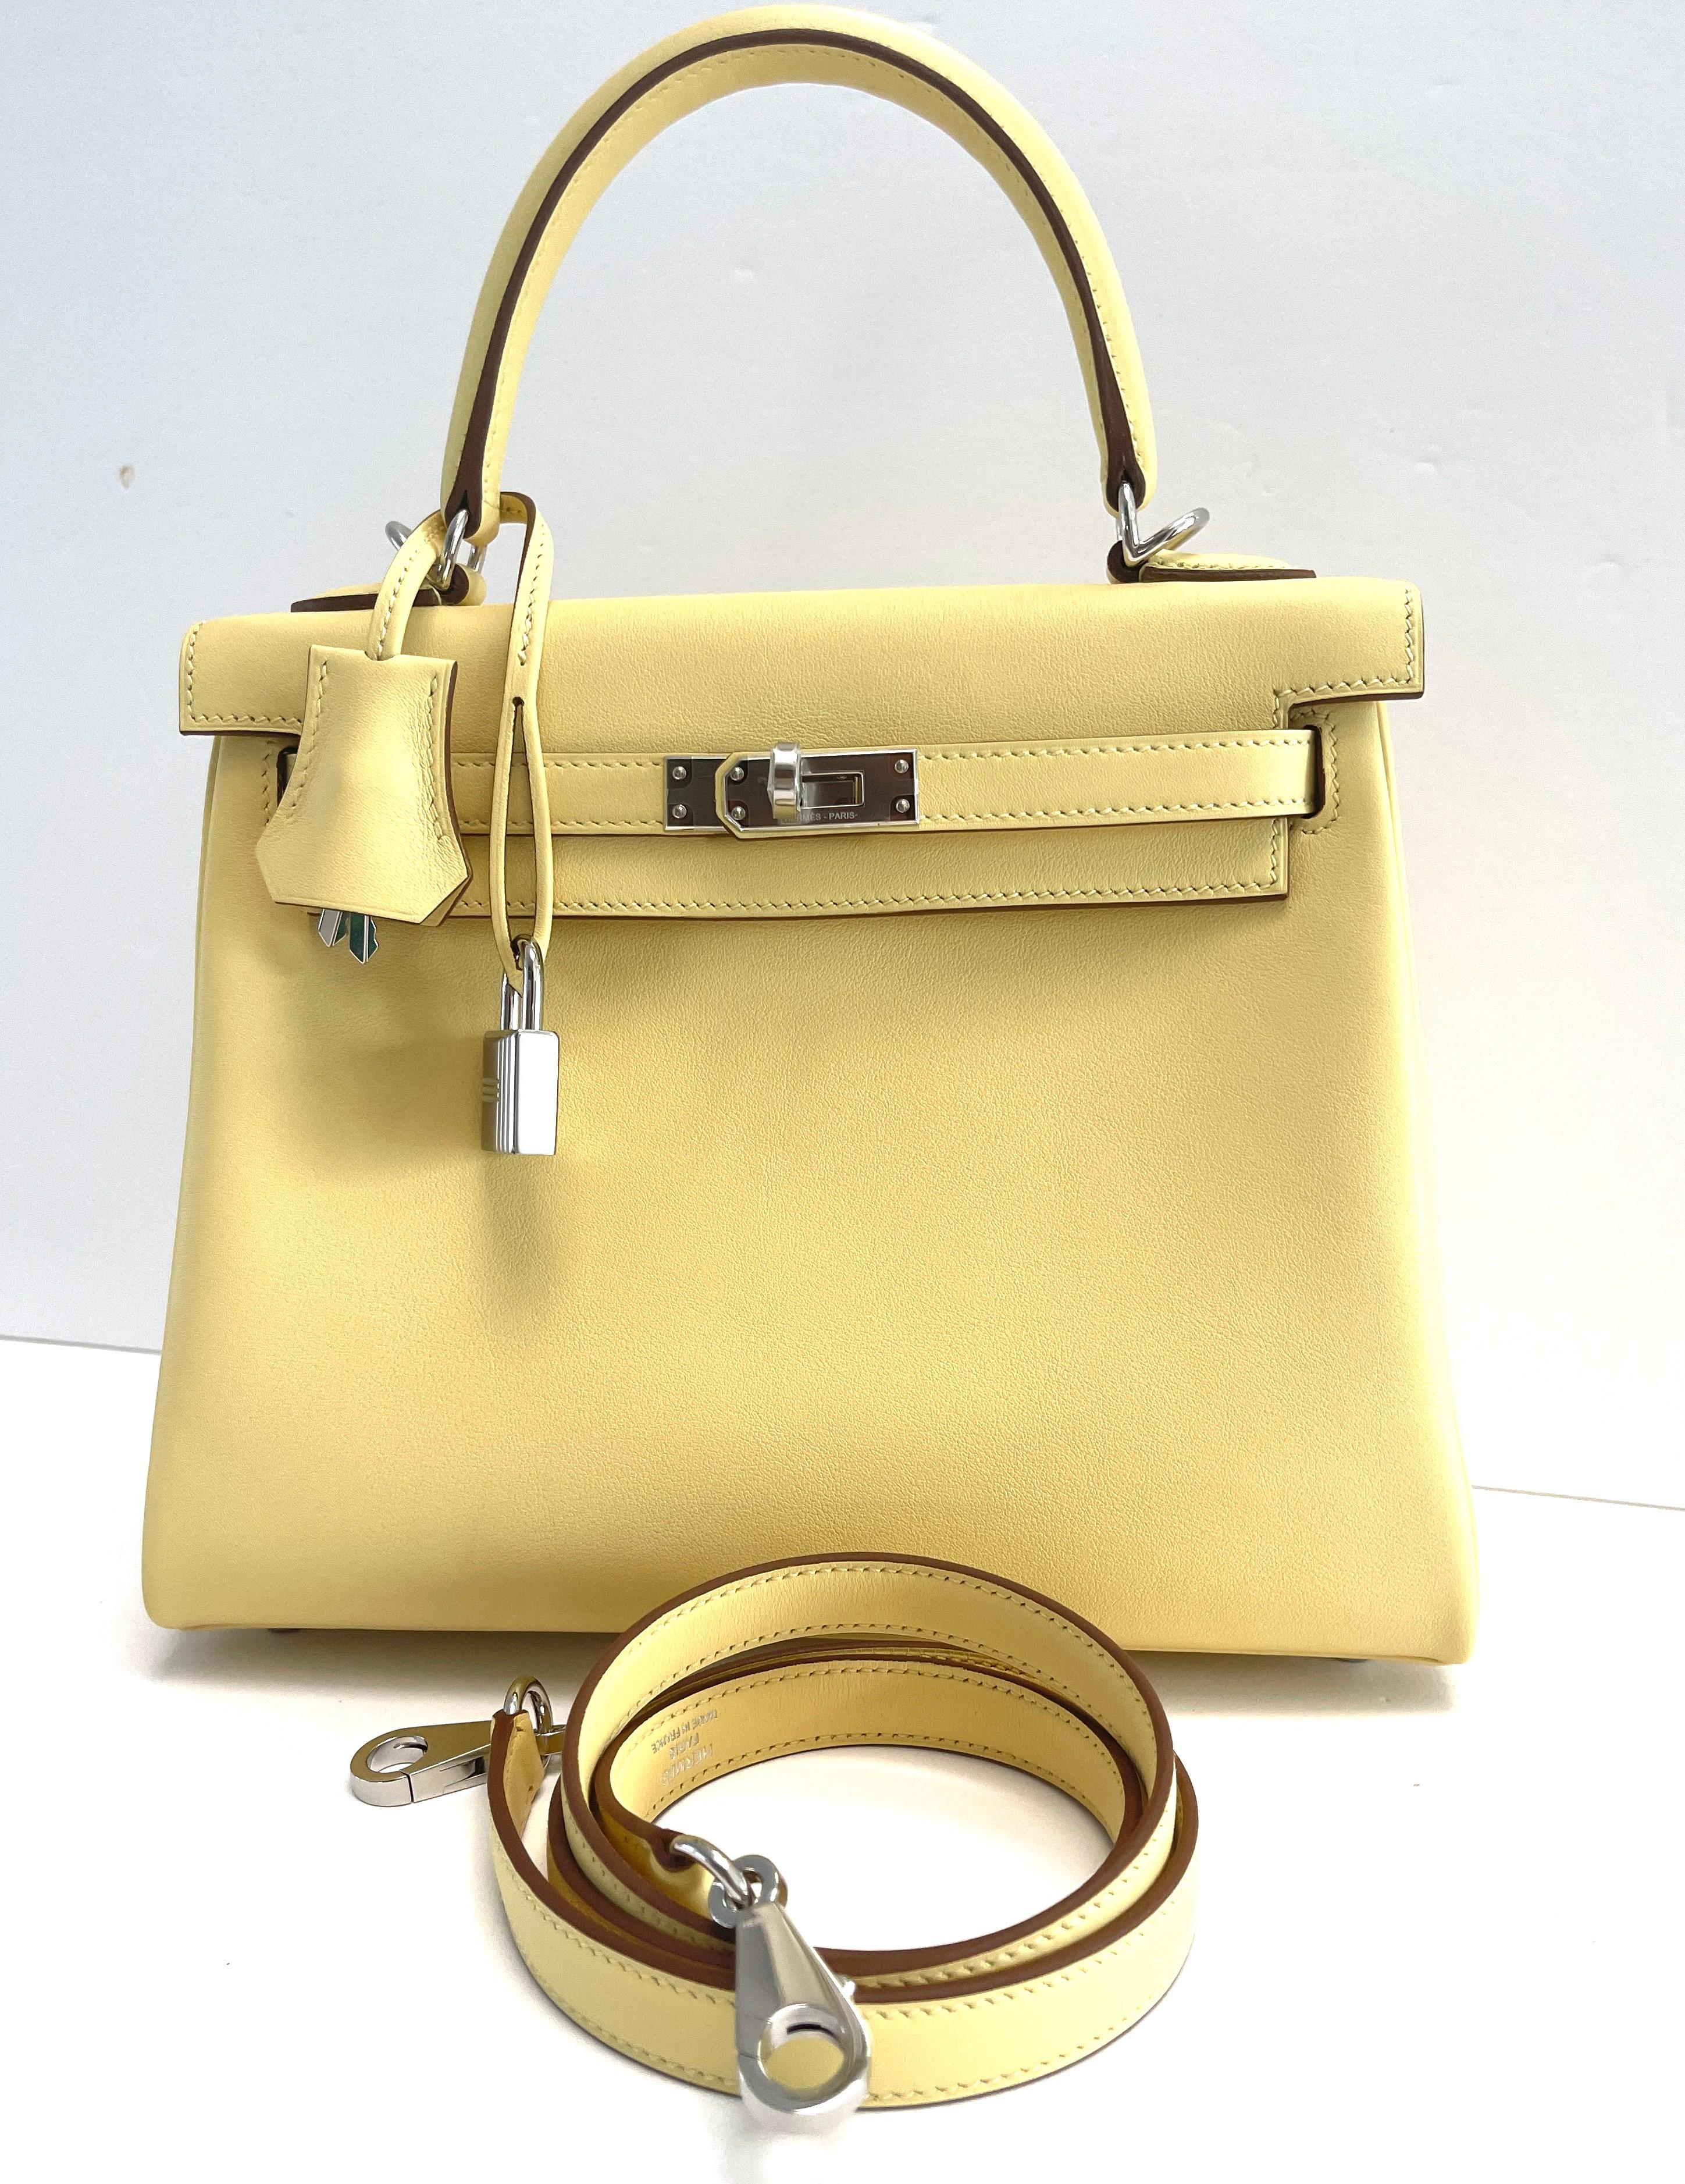 Hermes 25cm Kelly
Retourne Style
Swift Leather
Top Handle and removable shoulder strap
Tonal Stitching
Palladium Hardware
This most sought after Kelly bag is fabulous in the Jaune Poussin,  beautiful pastel with the palladium hardware


Z stamp